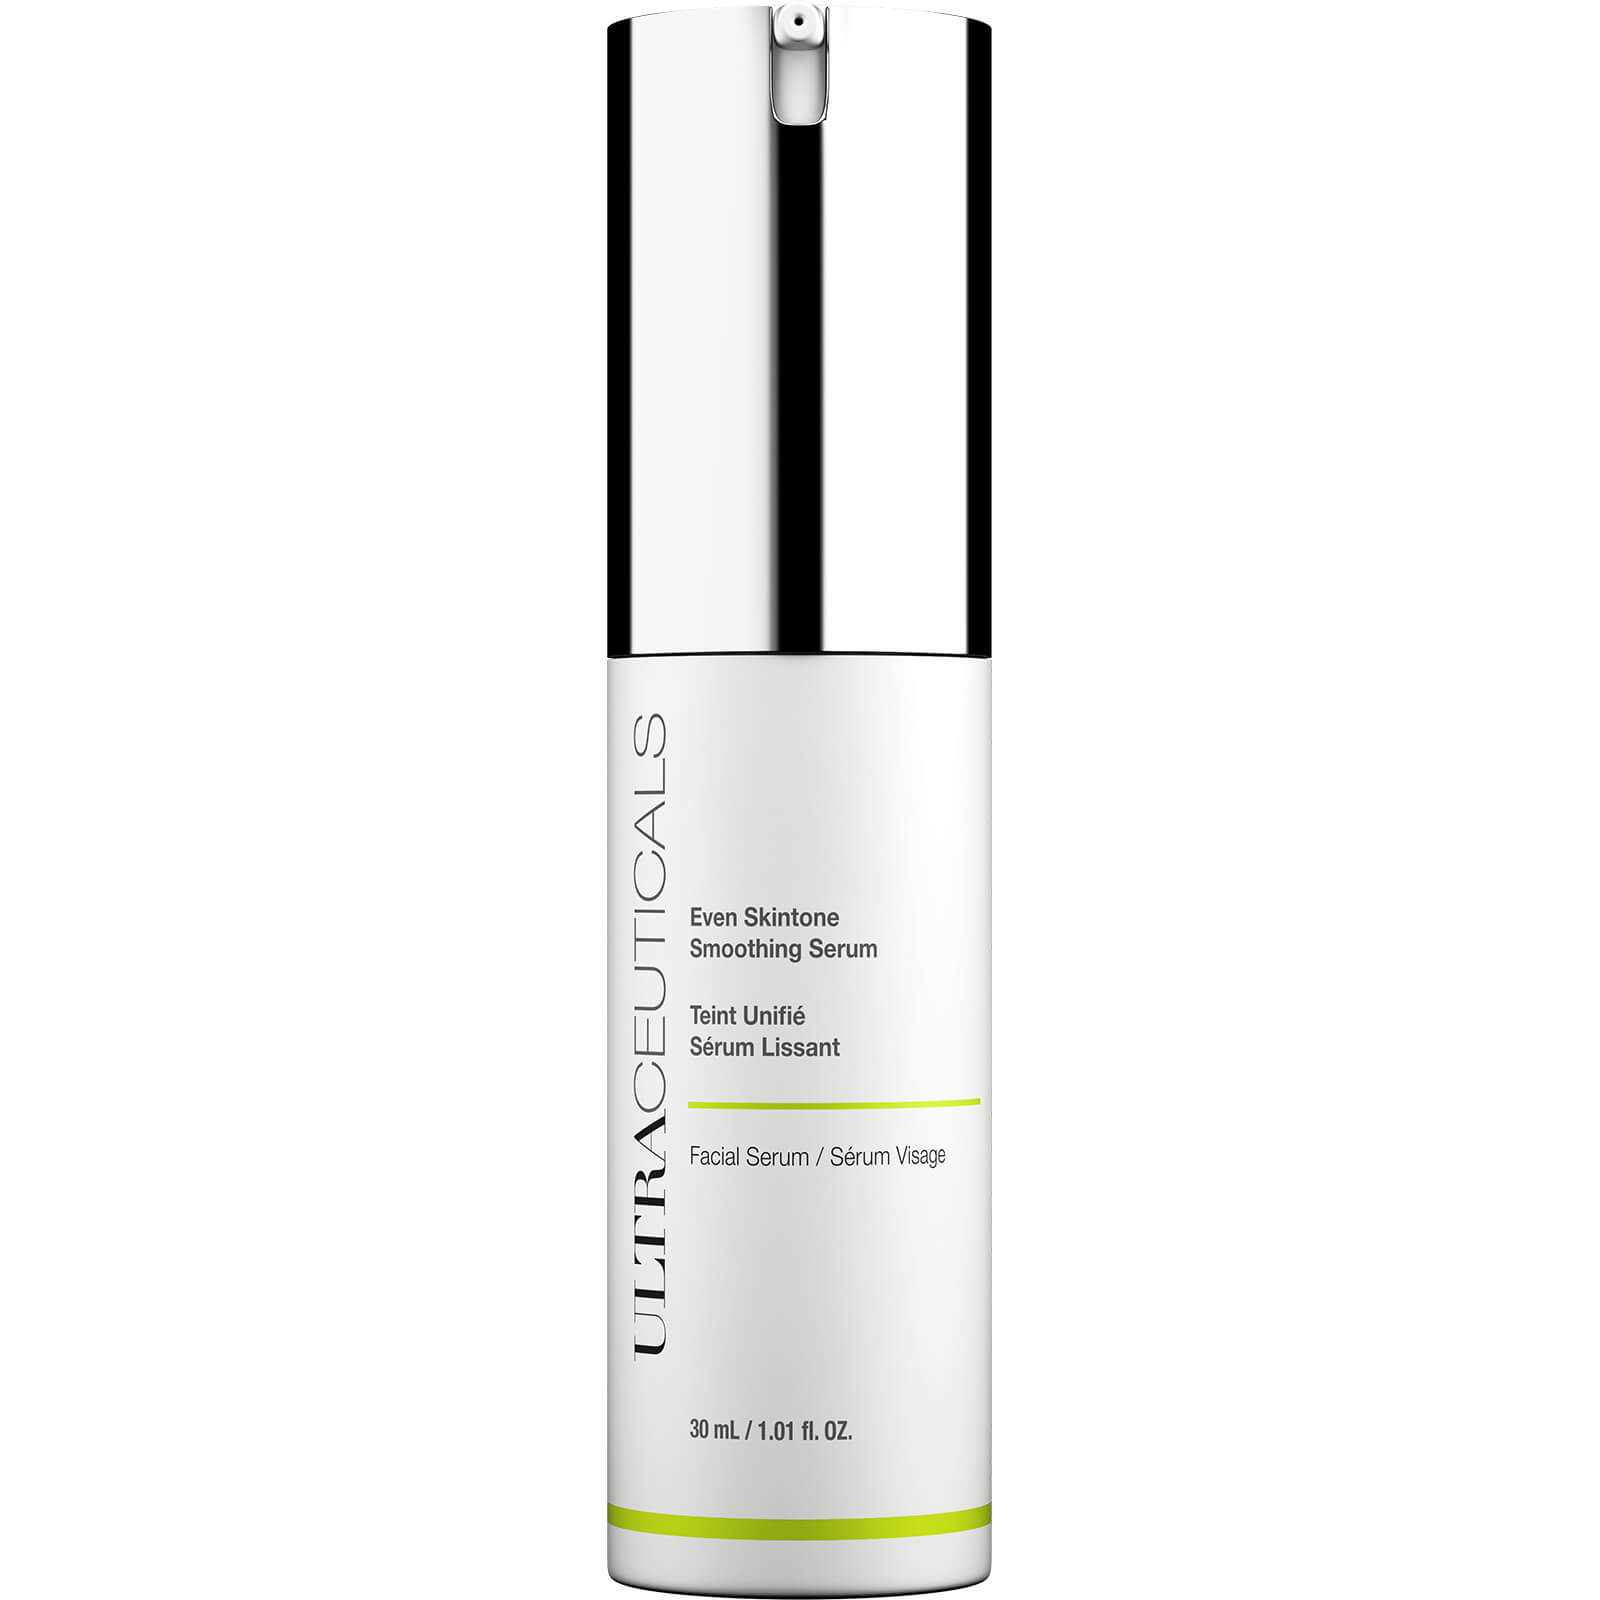 Ultracuticals Range from SkinSister, Even Skintone Smoothing Serum